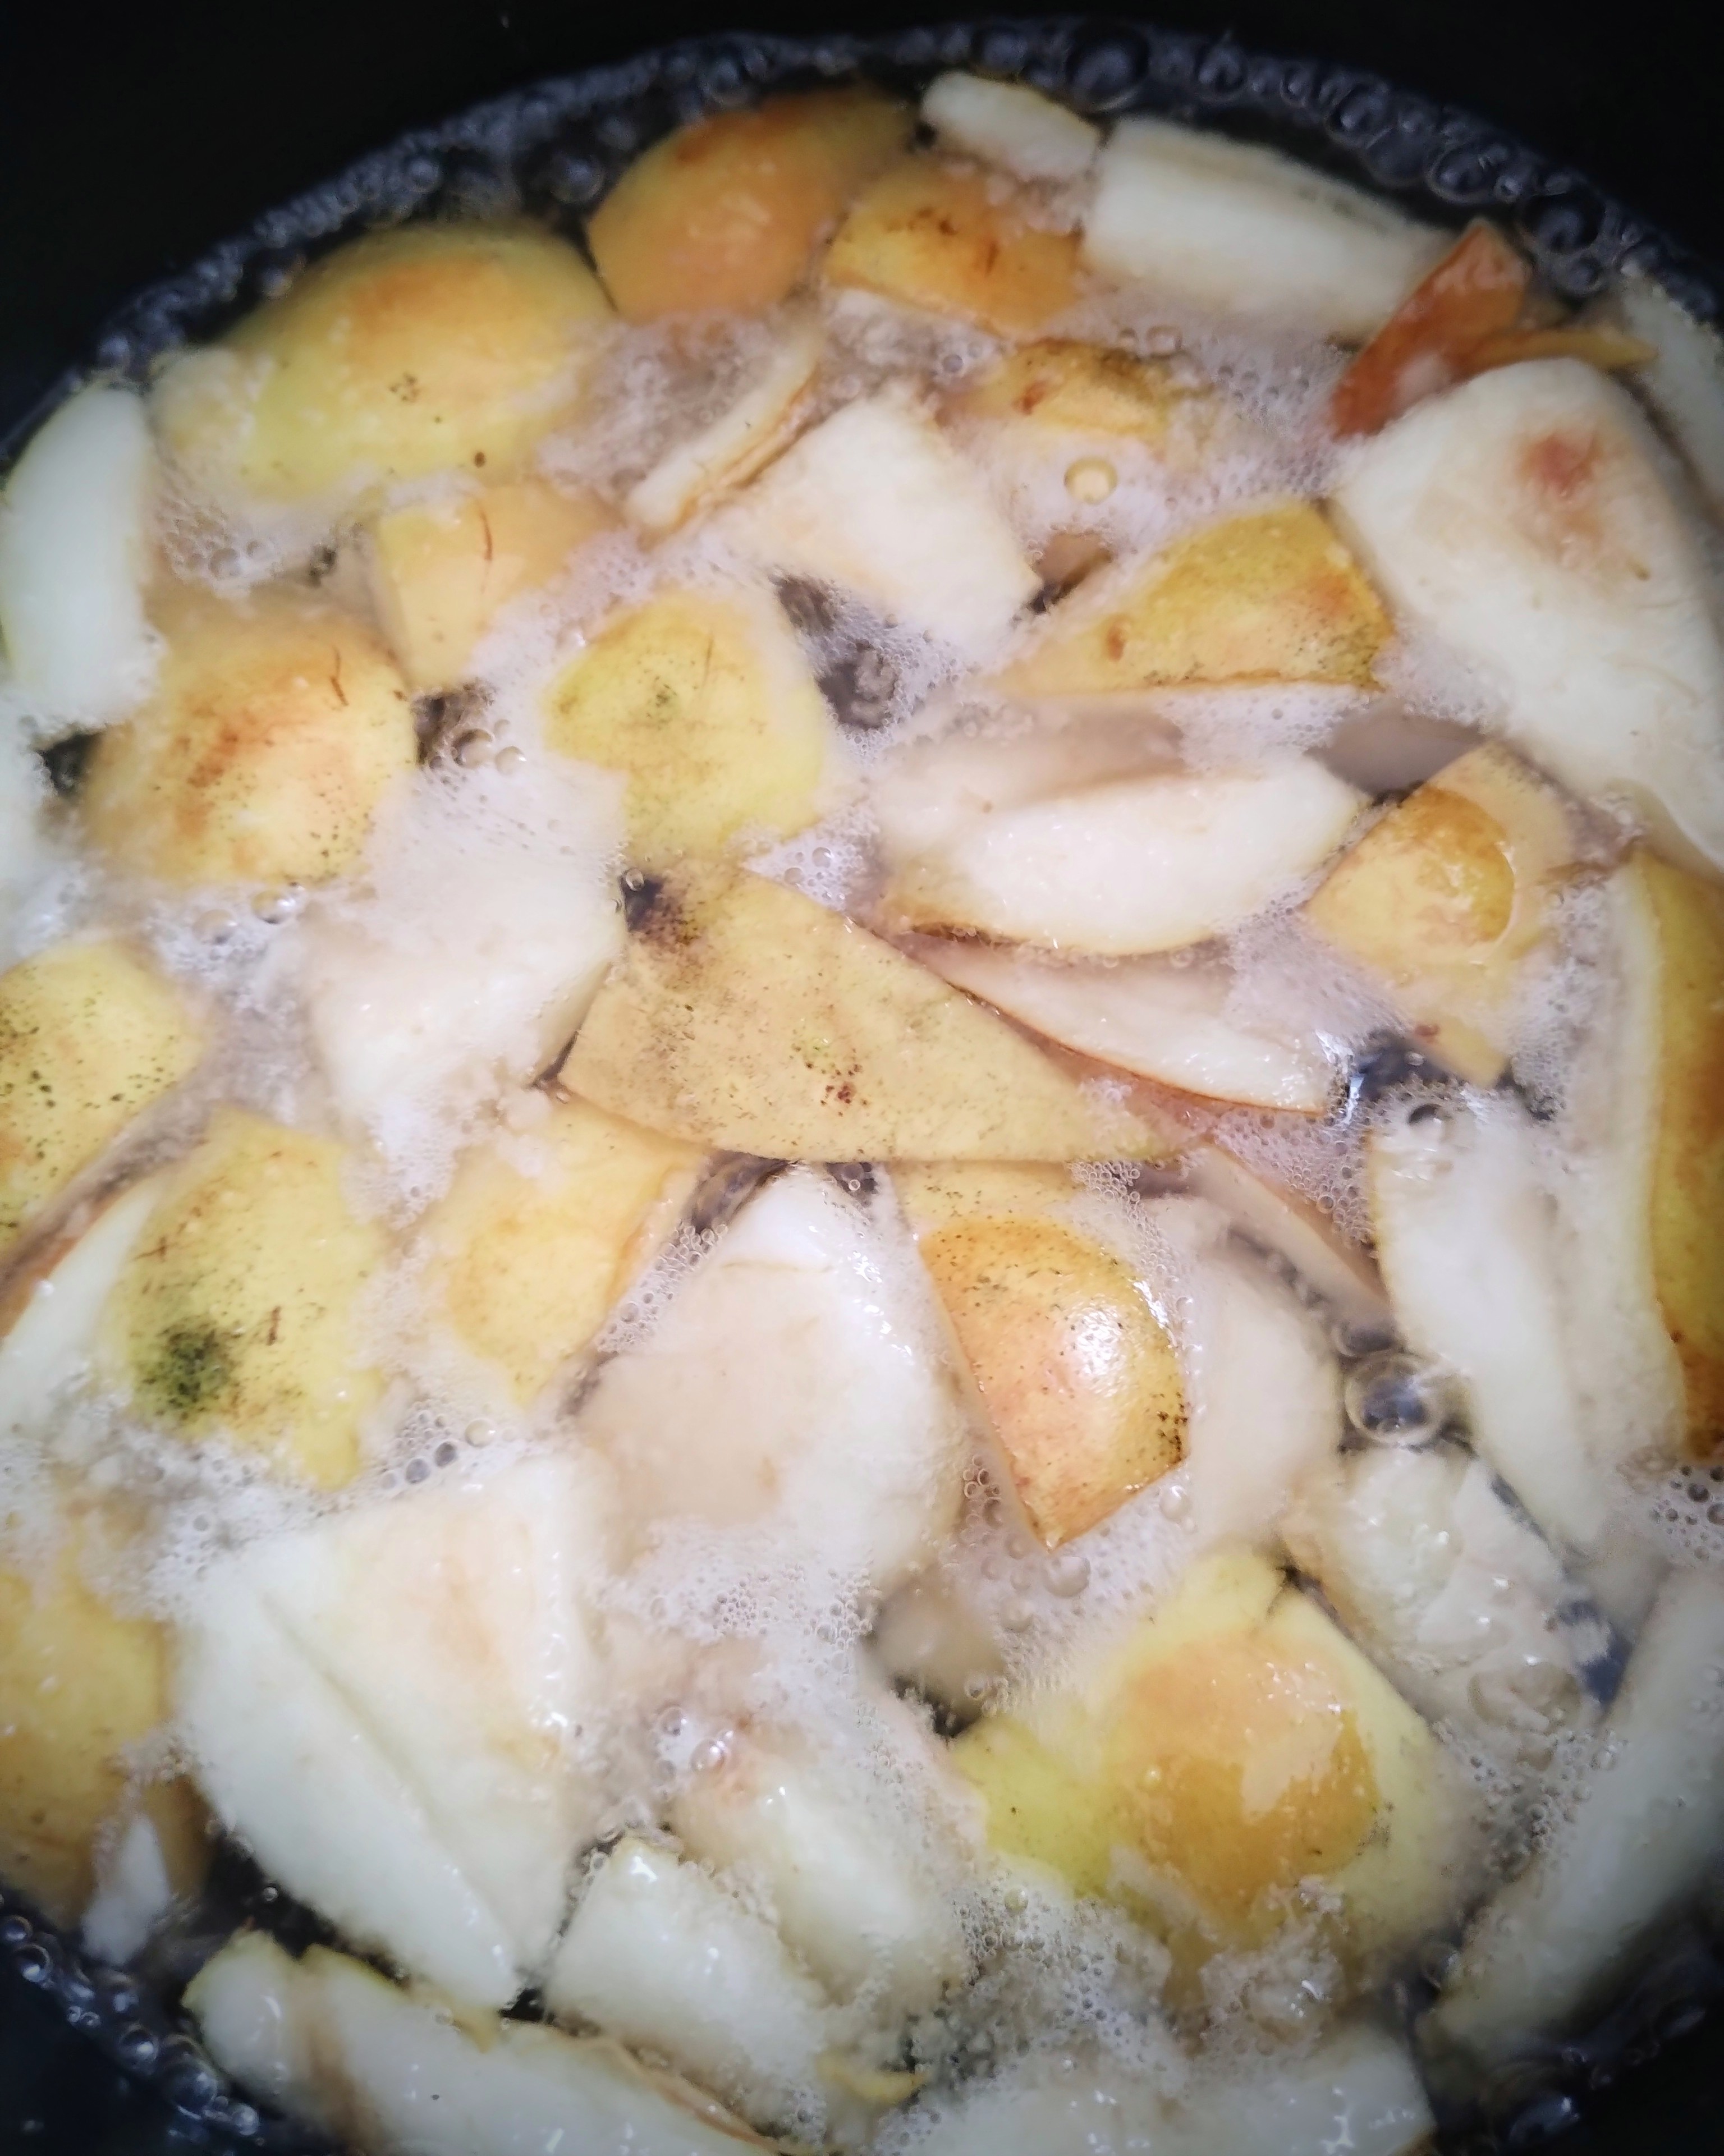 Simmer the water, sugar, and pear mix